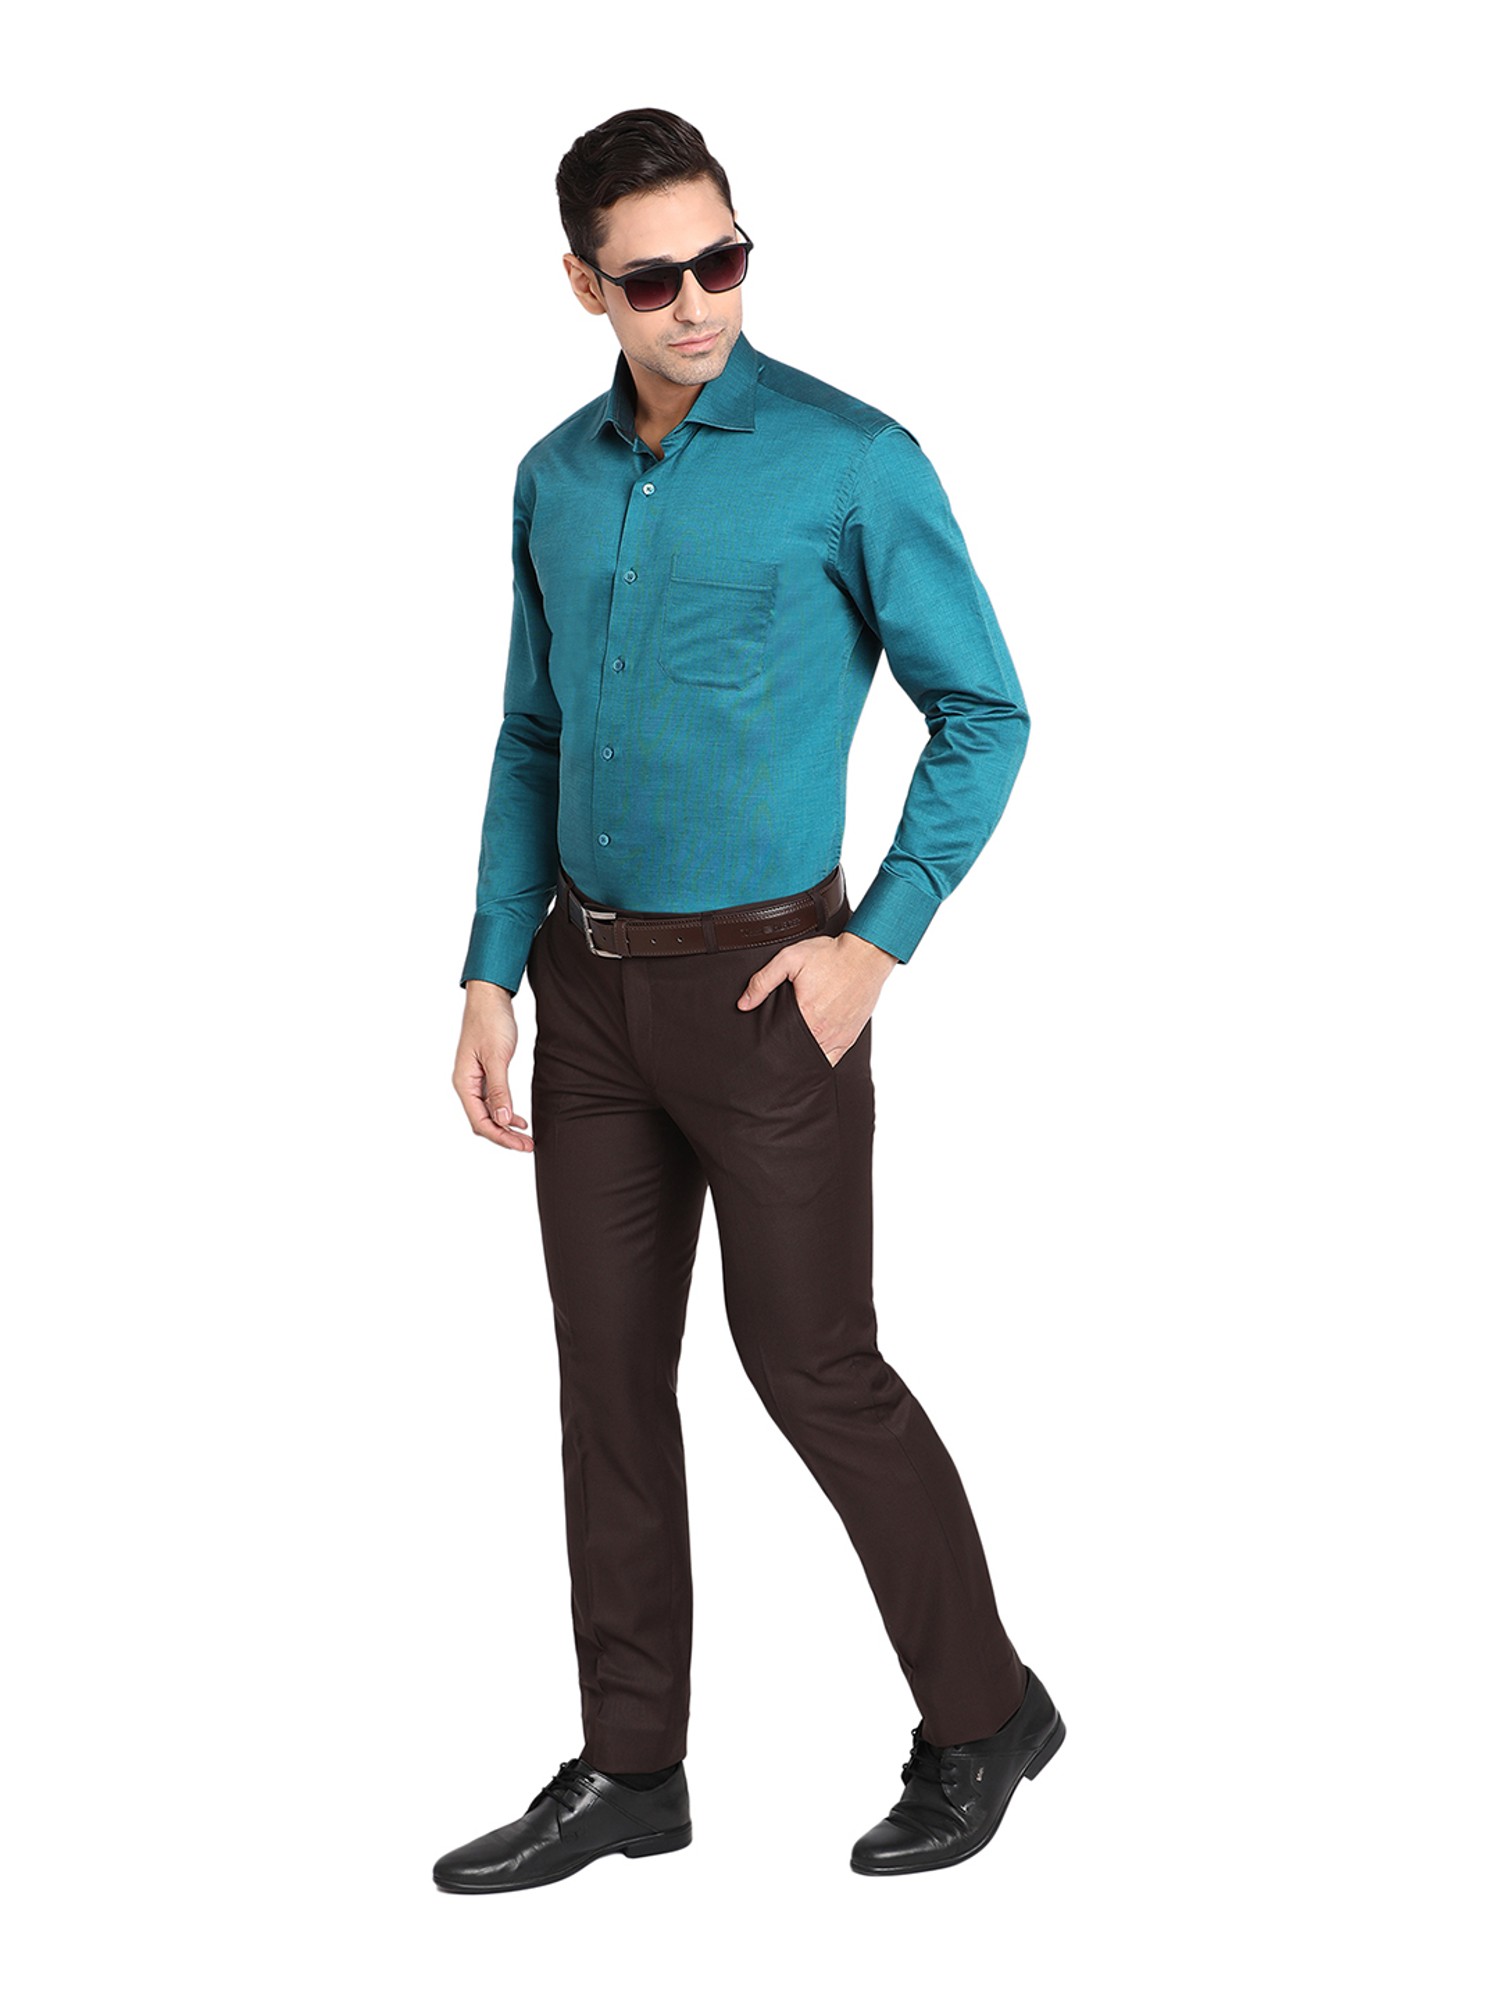 60 Dashing Formal Shirt And Pant Combinations For Men  Blue shirt black  pants Shirt and pants combinations for men Shirt outfit men